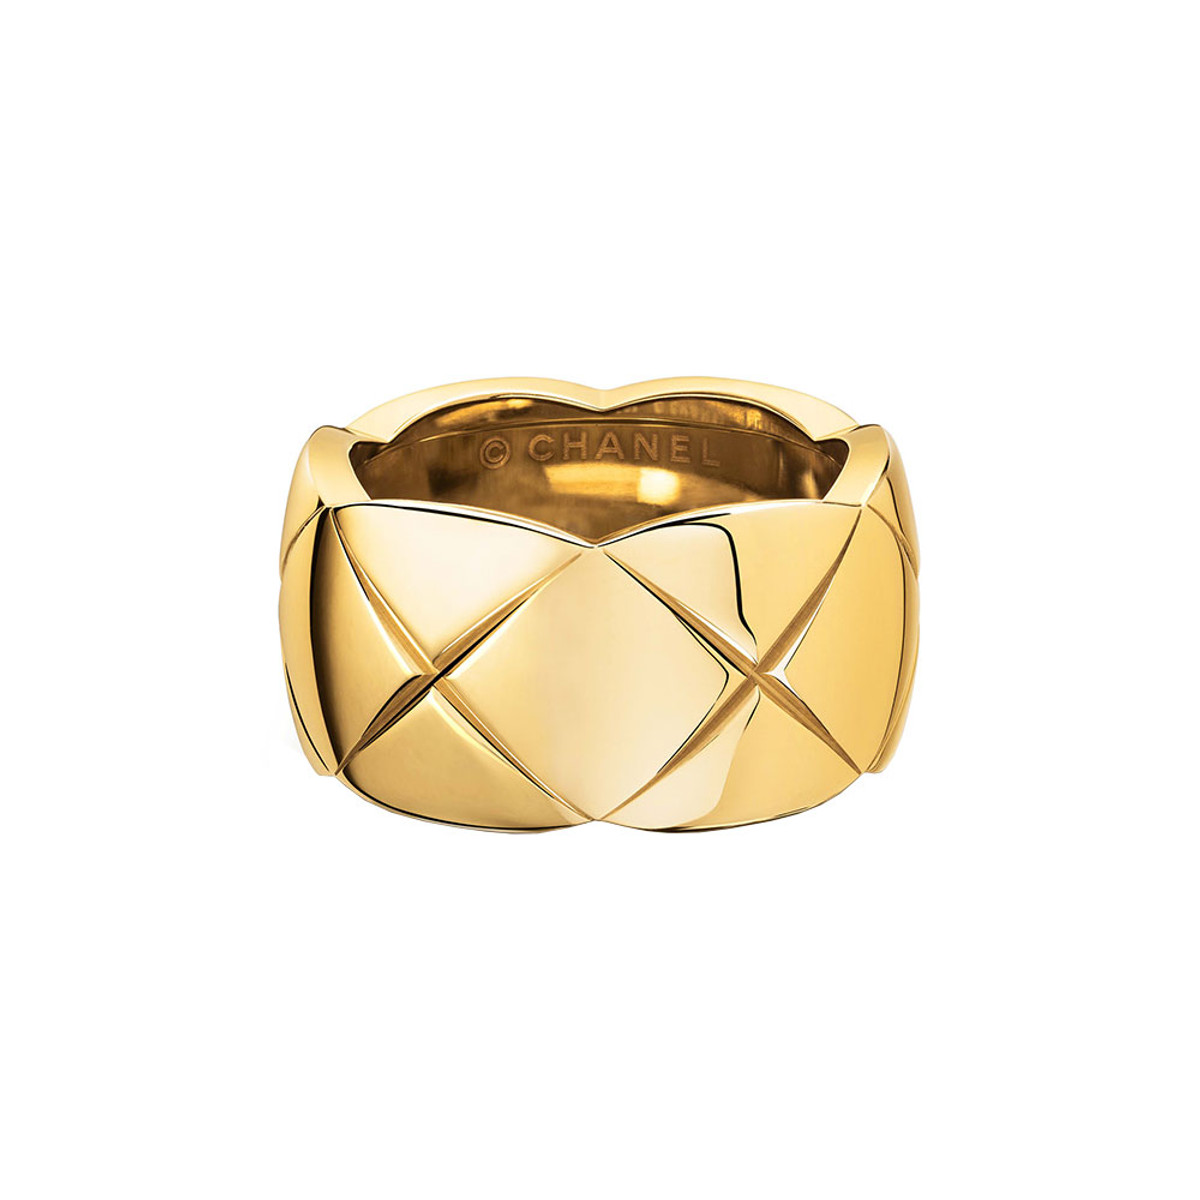 CHANEL COCO CRUSH RING-25965 Product Image